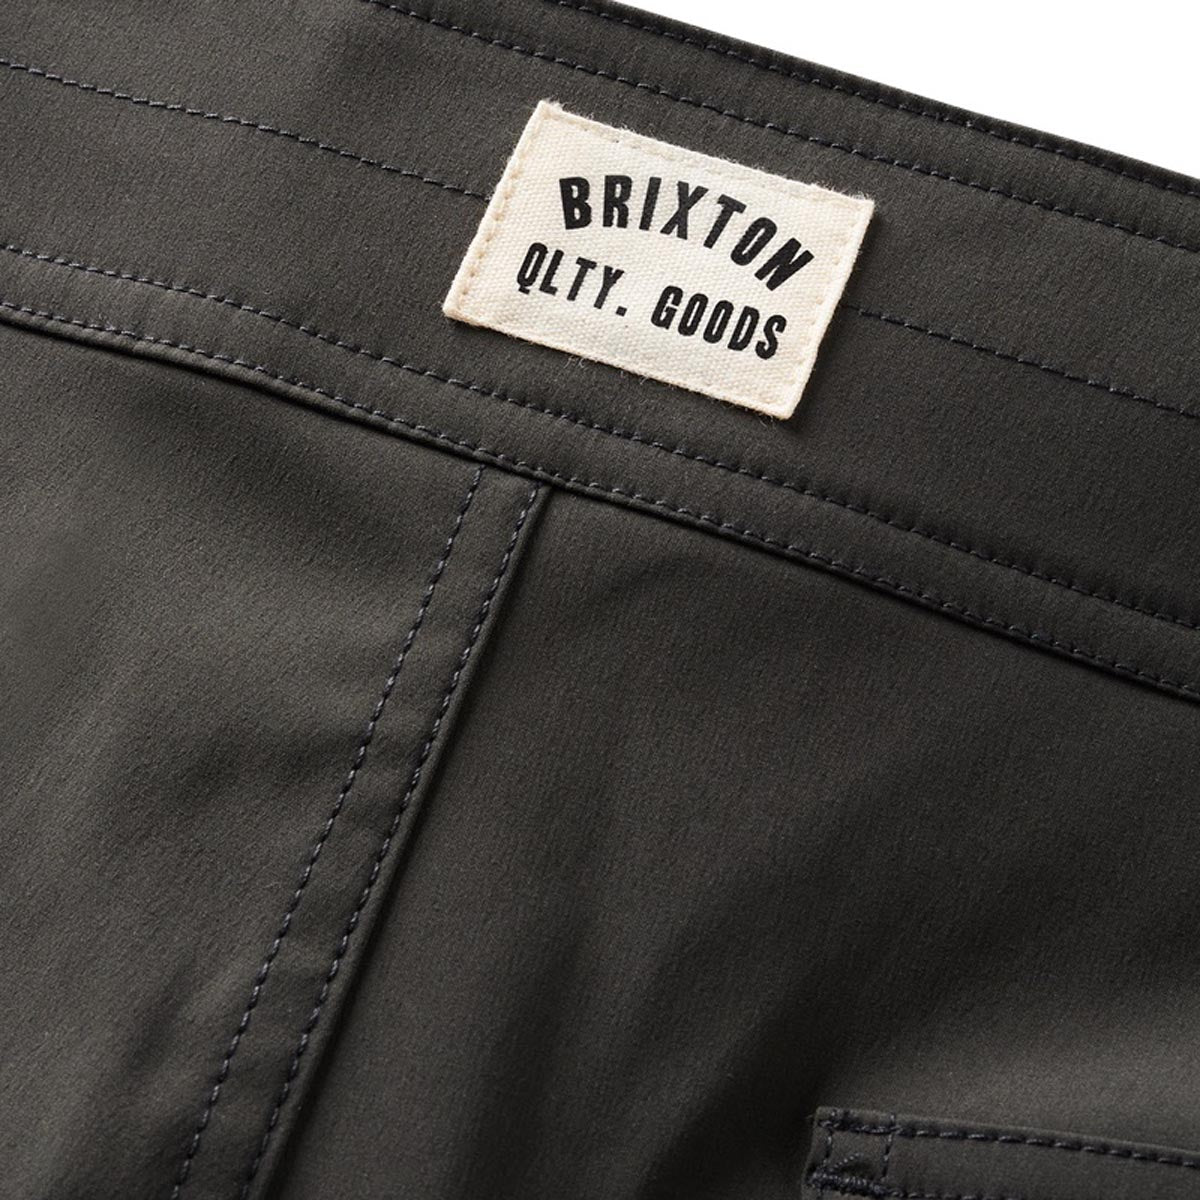 Brixton 60's Stretch Board Shorts - Washed Black/Charcoal image 3